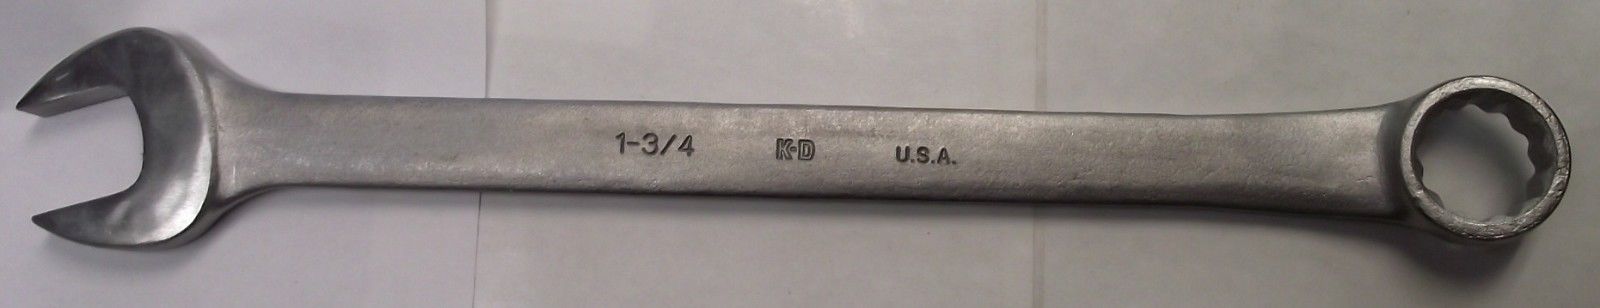 KD Tools 63156 1-3/4" Combination Wrench 12pt. USA